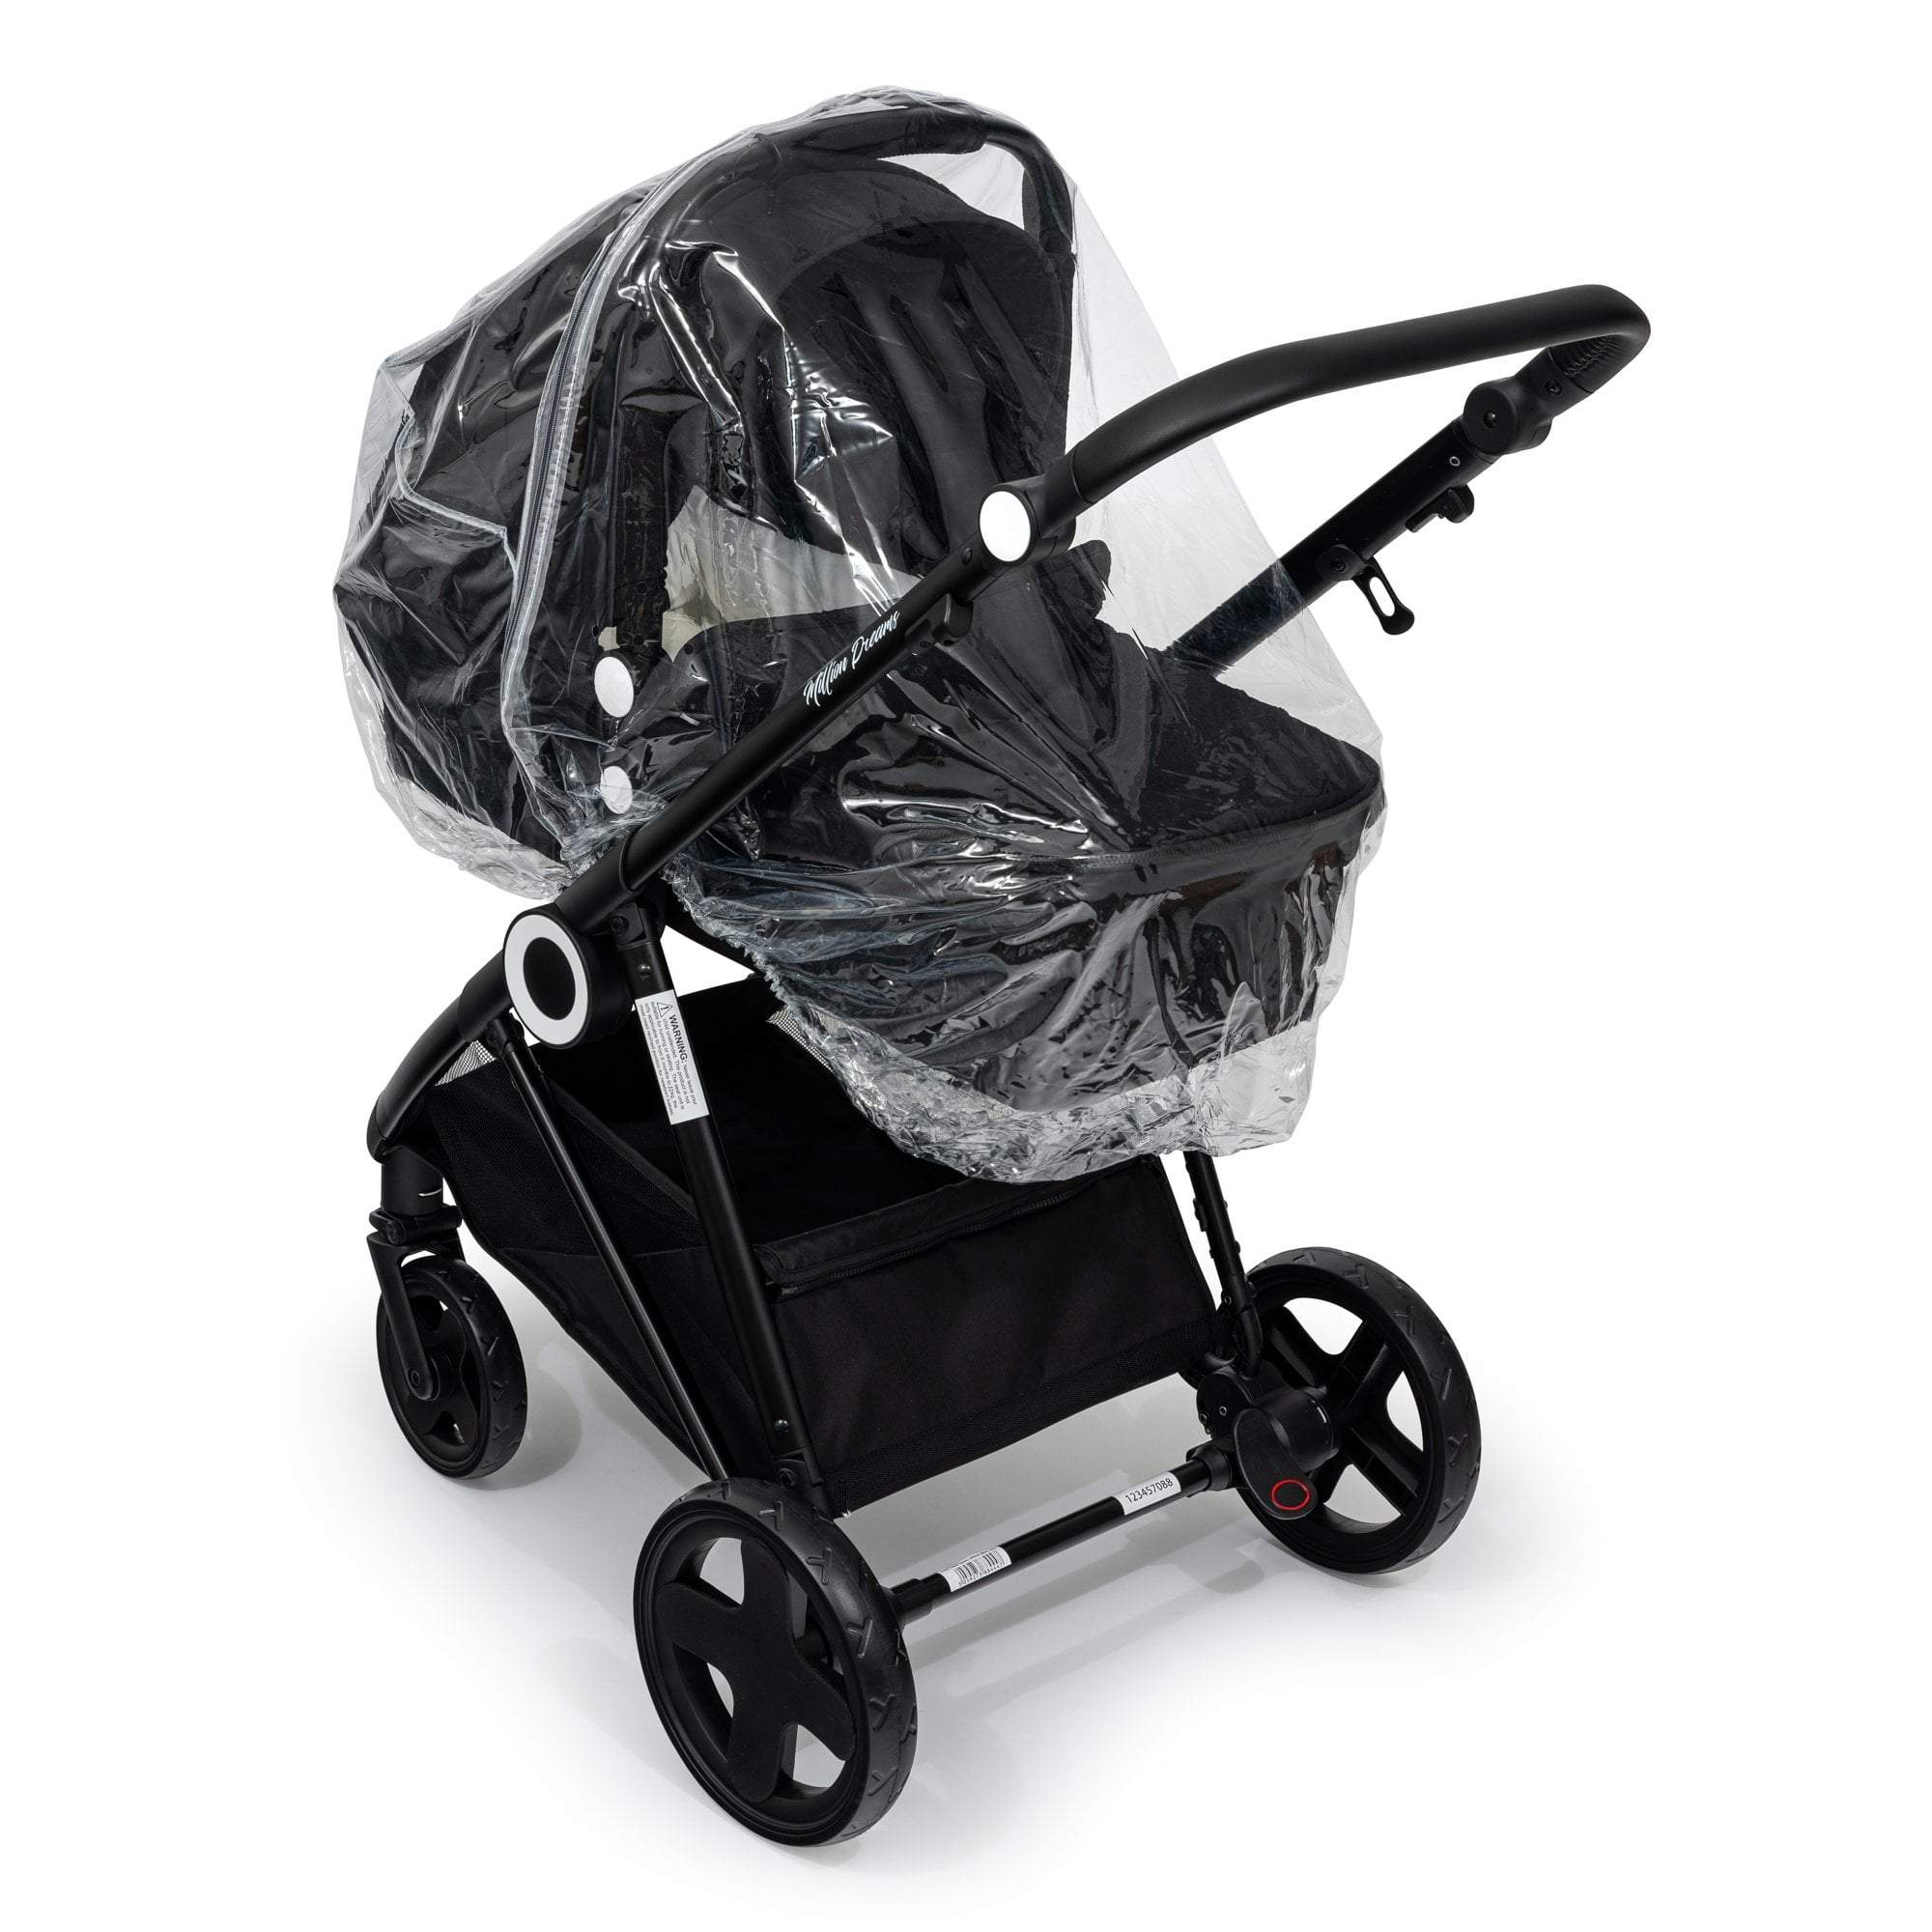 Carrycot Raincover Compatible With Little Shield - Fits All Models - For Your Little One